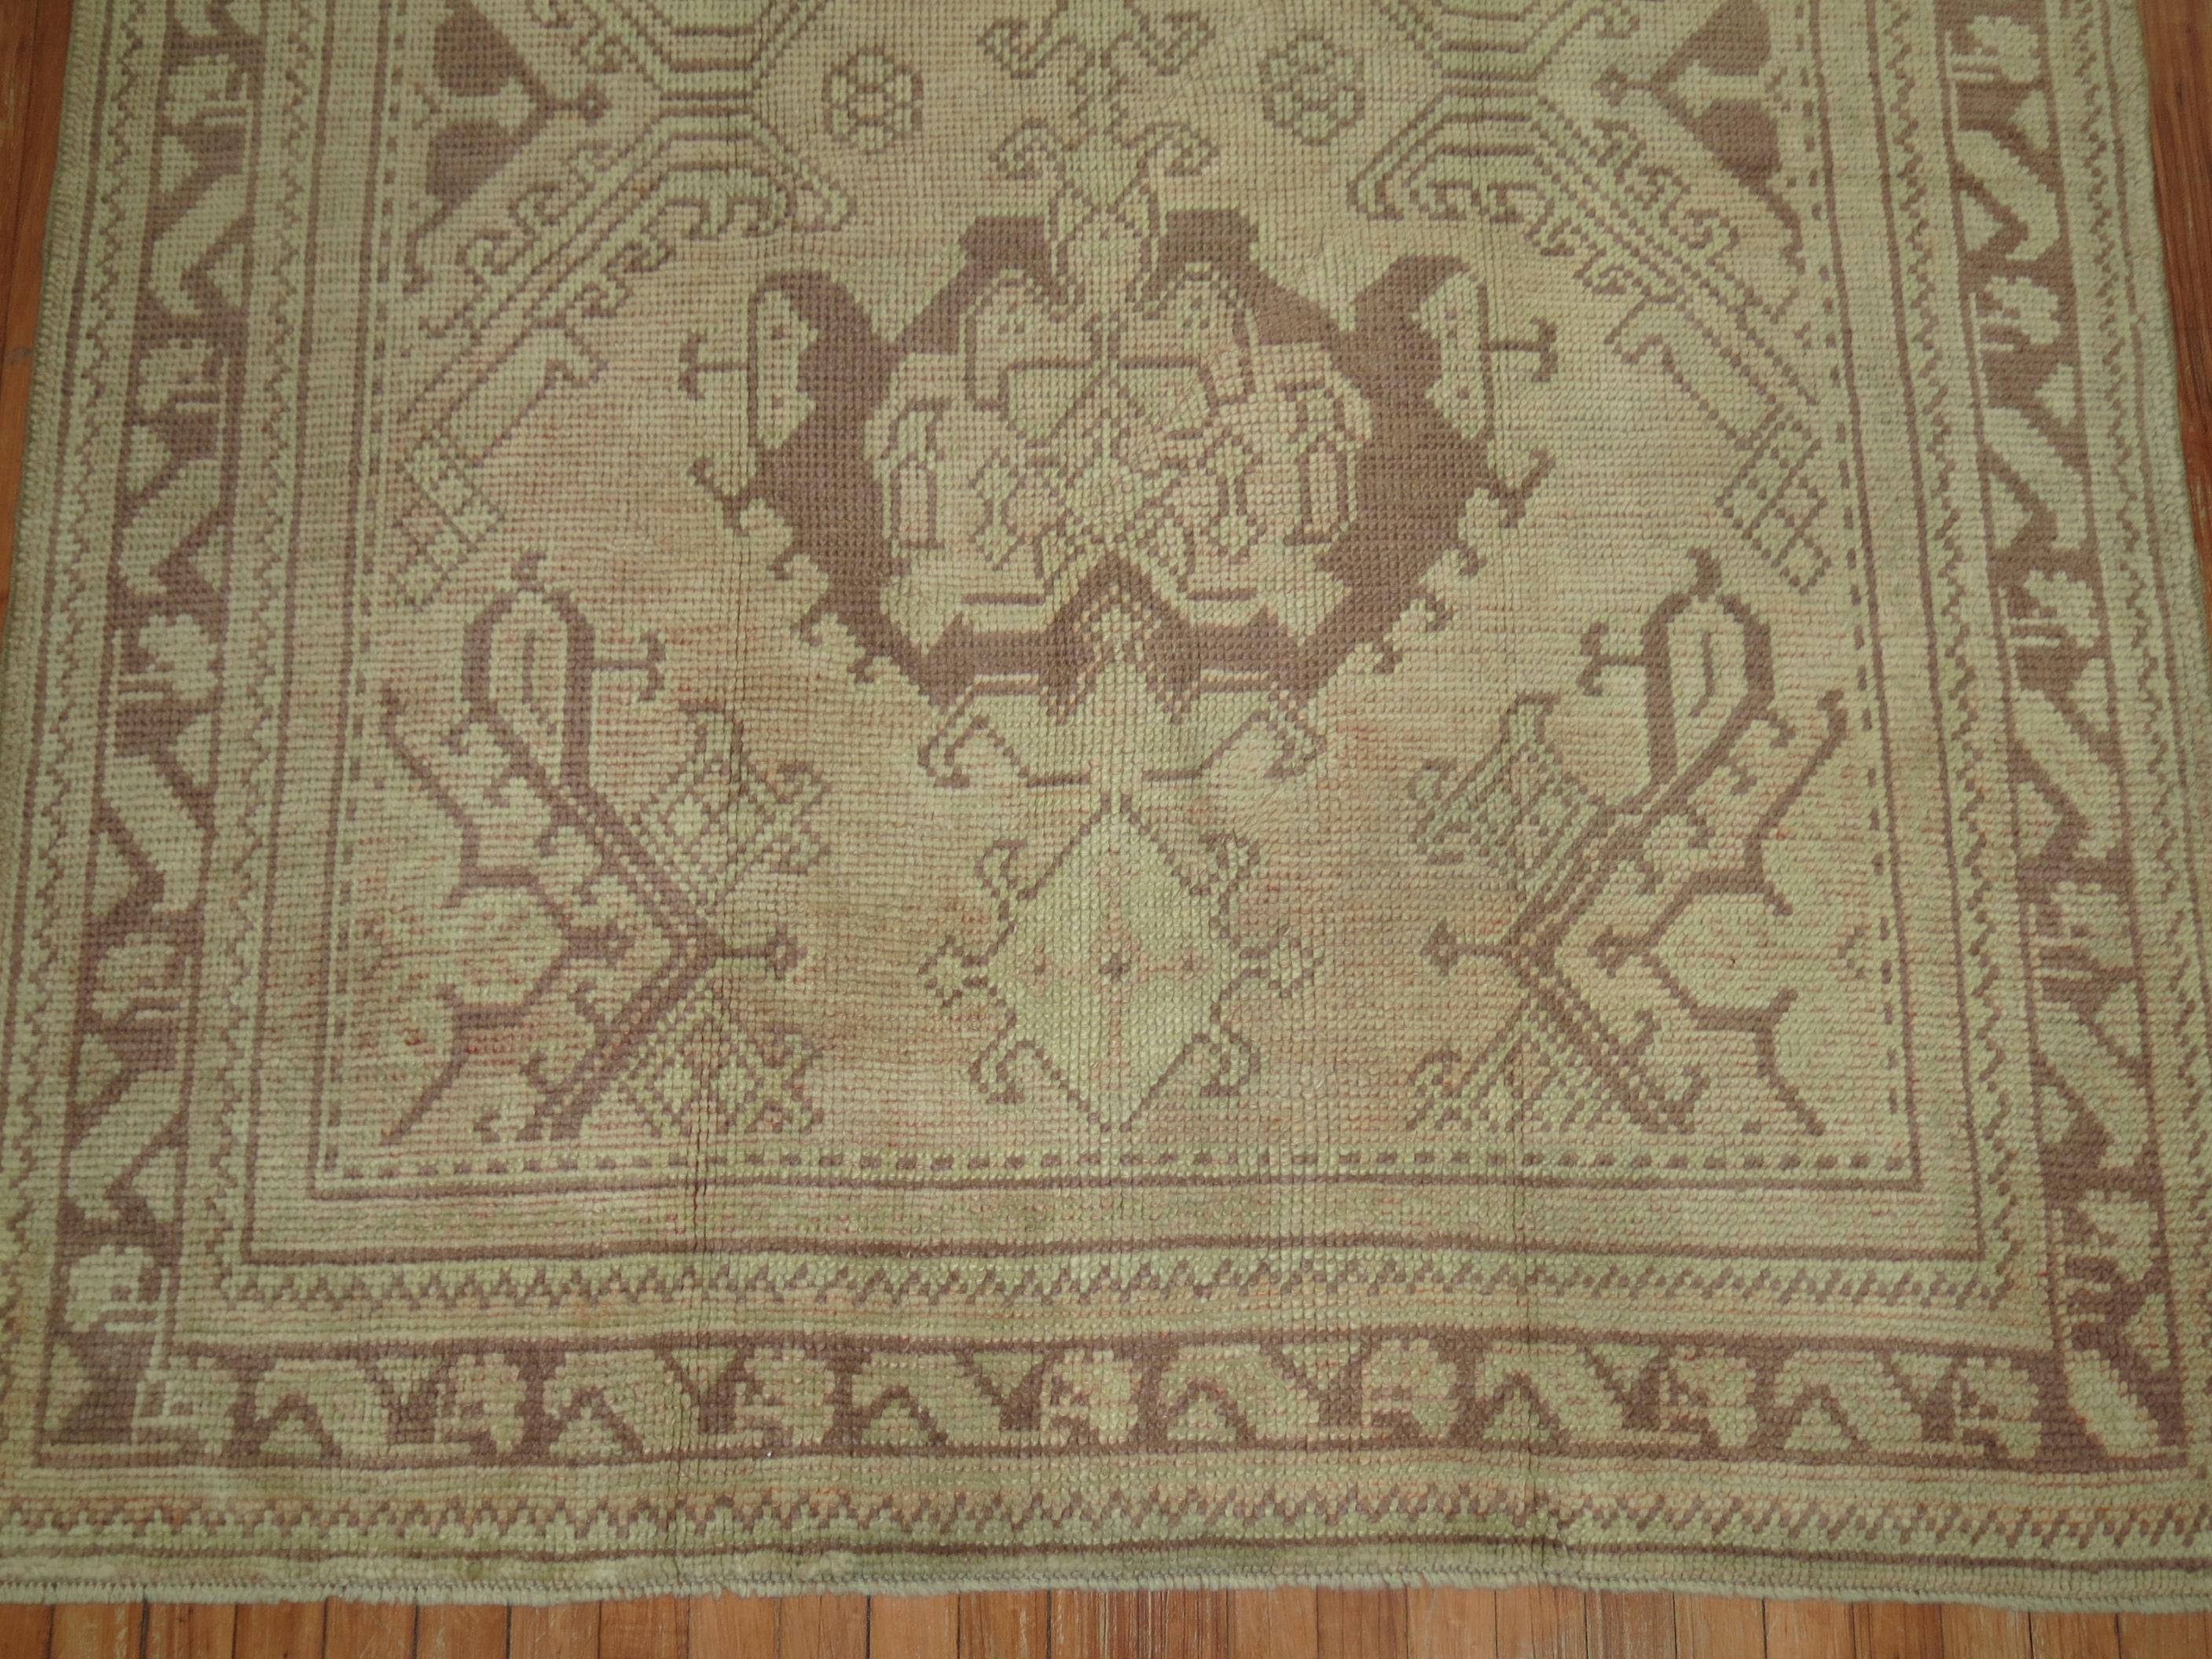 An antique Turkish Oushak rug in taupe, beige and brown accents. Recommended for an entry / foyer space, circa 1920s.

Size: 5'1” x 8'1”.